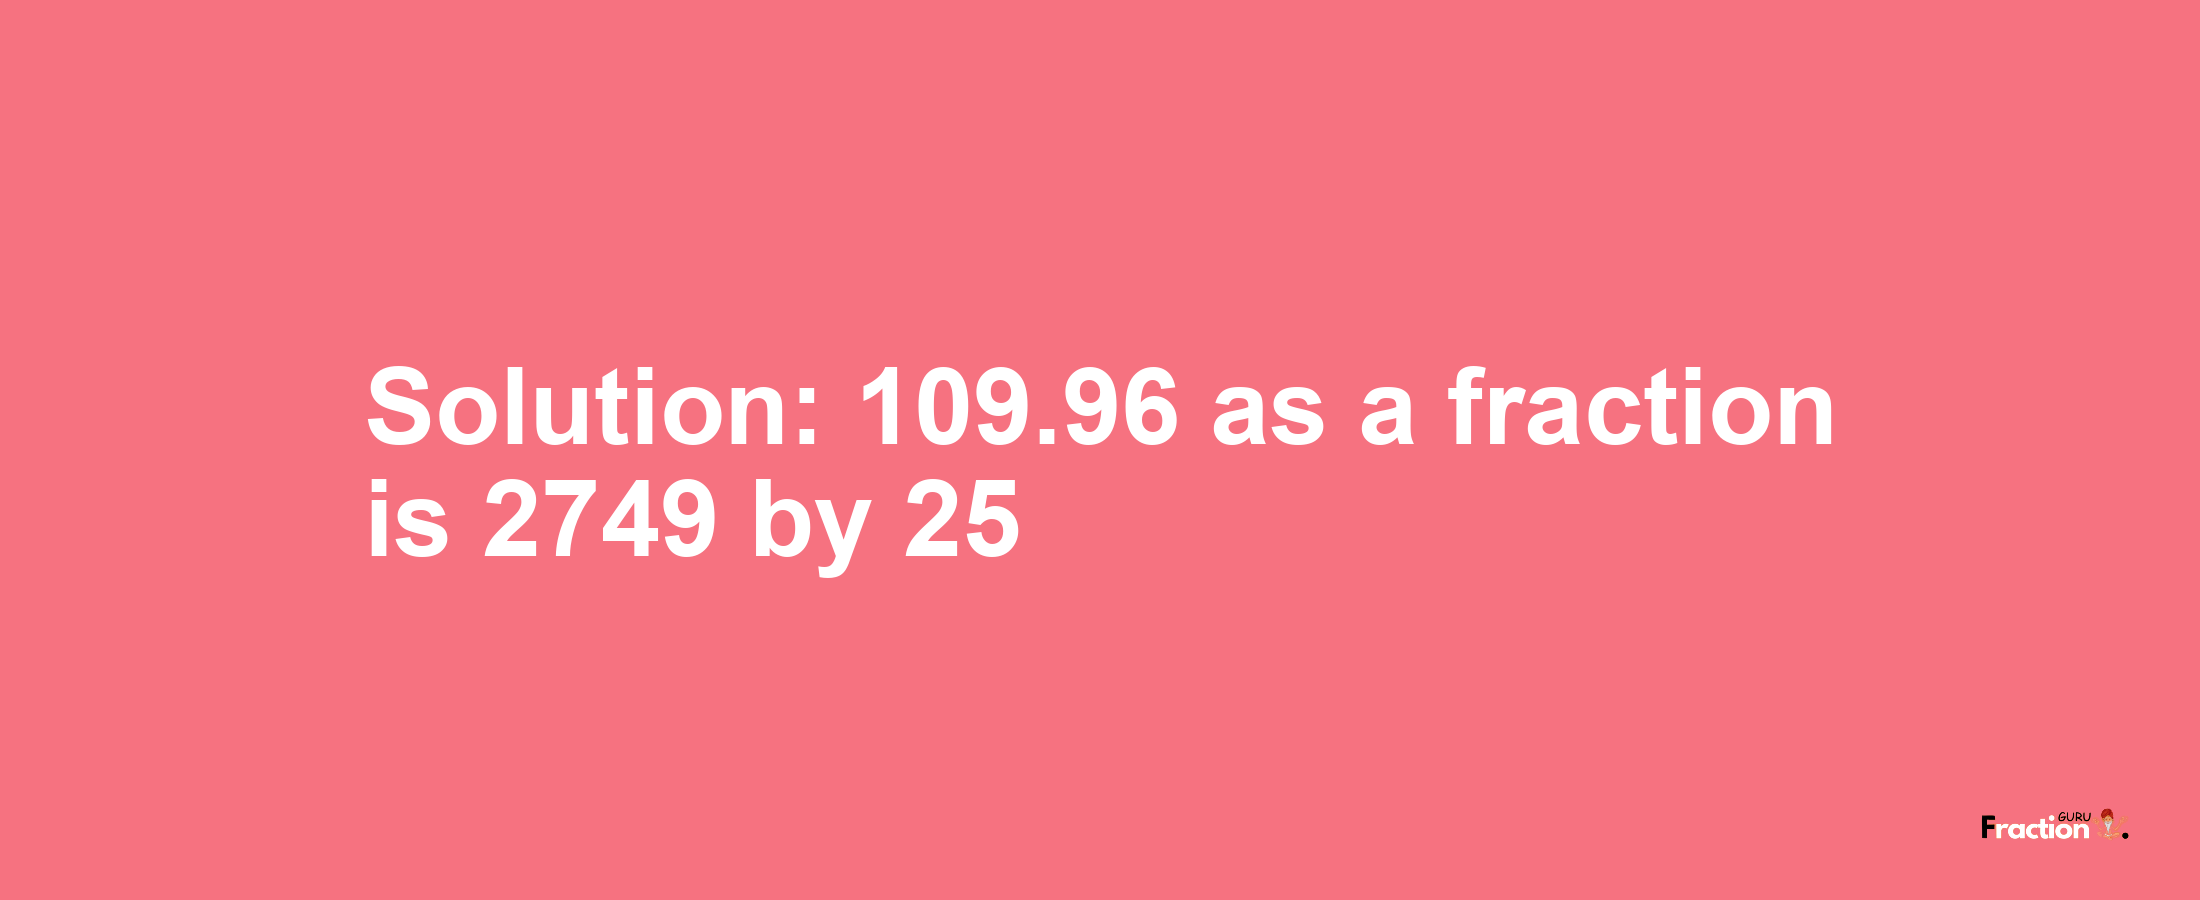 Solution:109.96 as a fraction is 2749/25